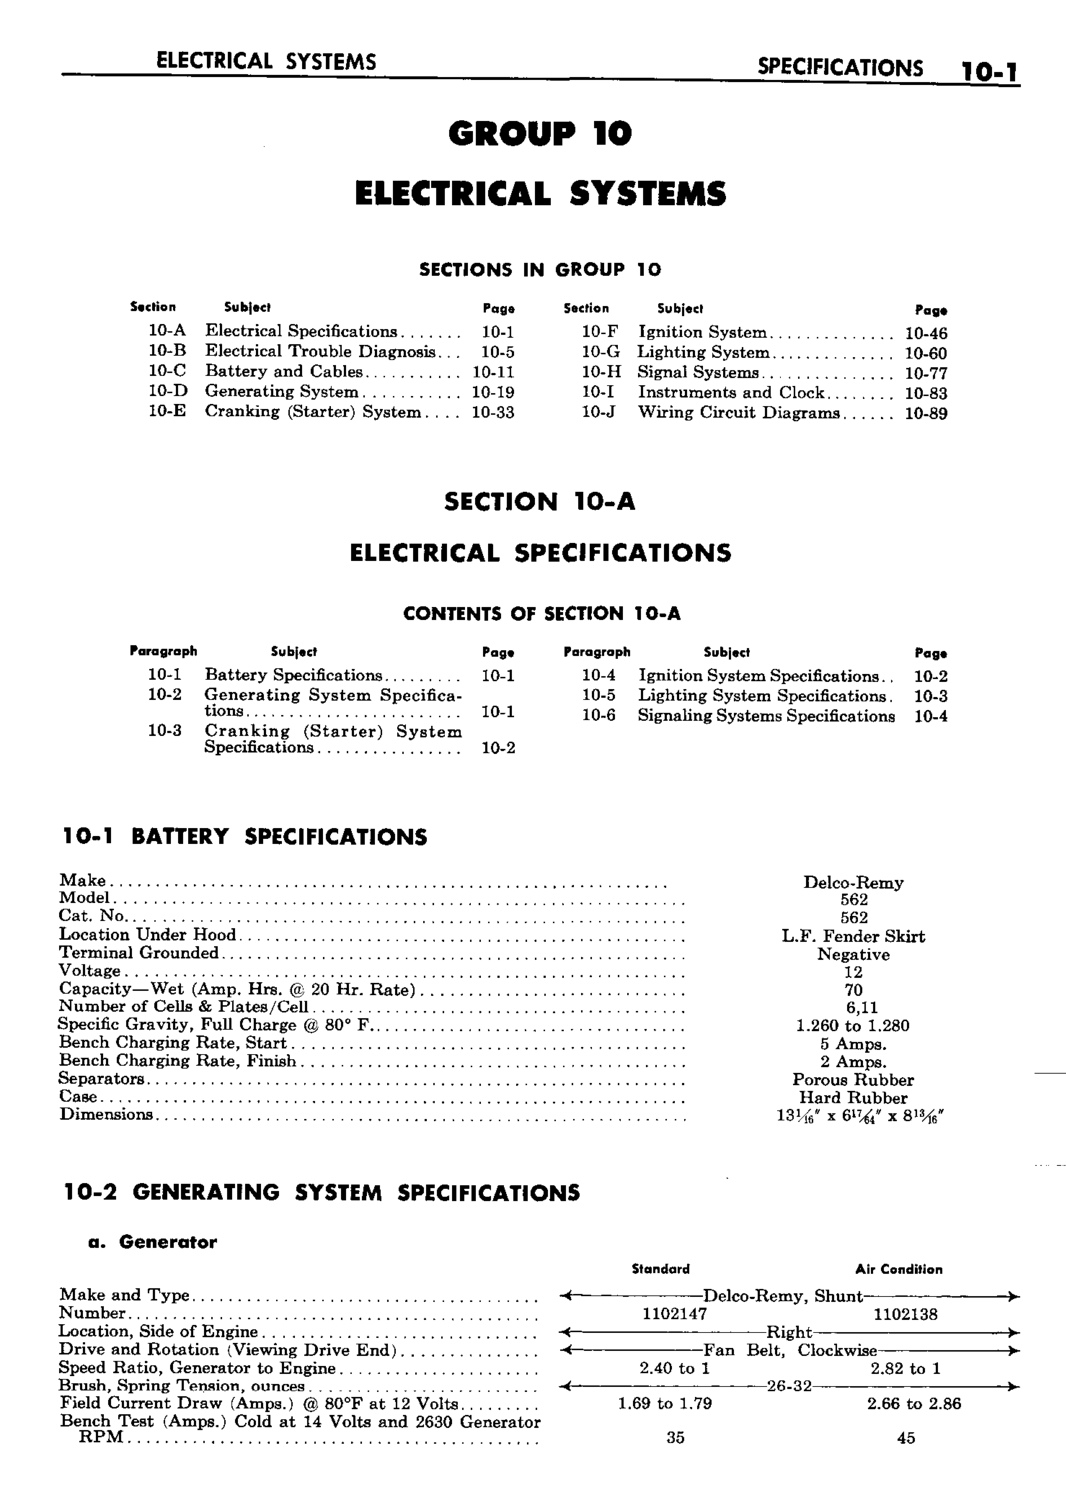 n_11 1959 Buick Shop Manual - Electrical Systems-001-001.jpg